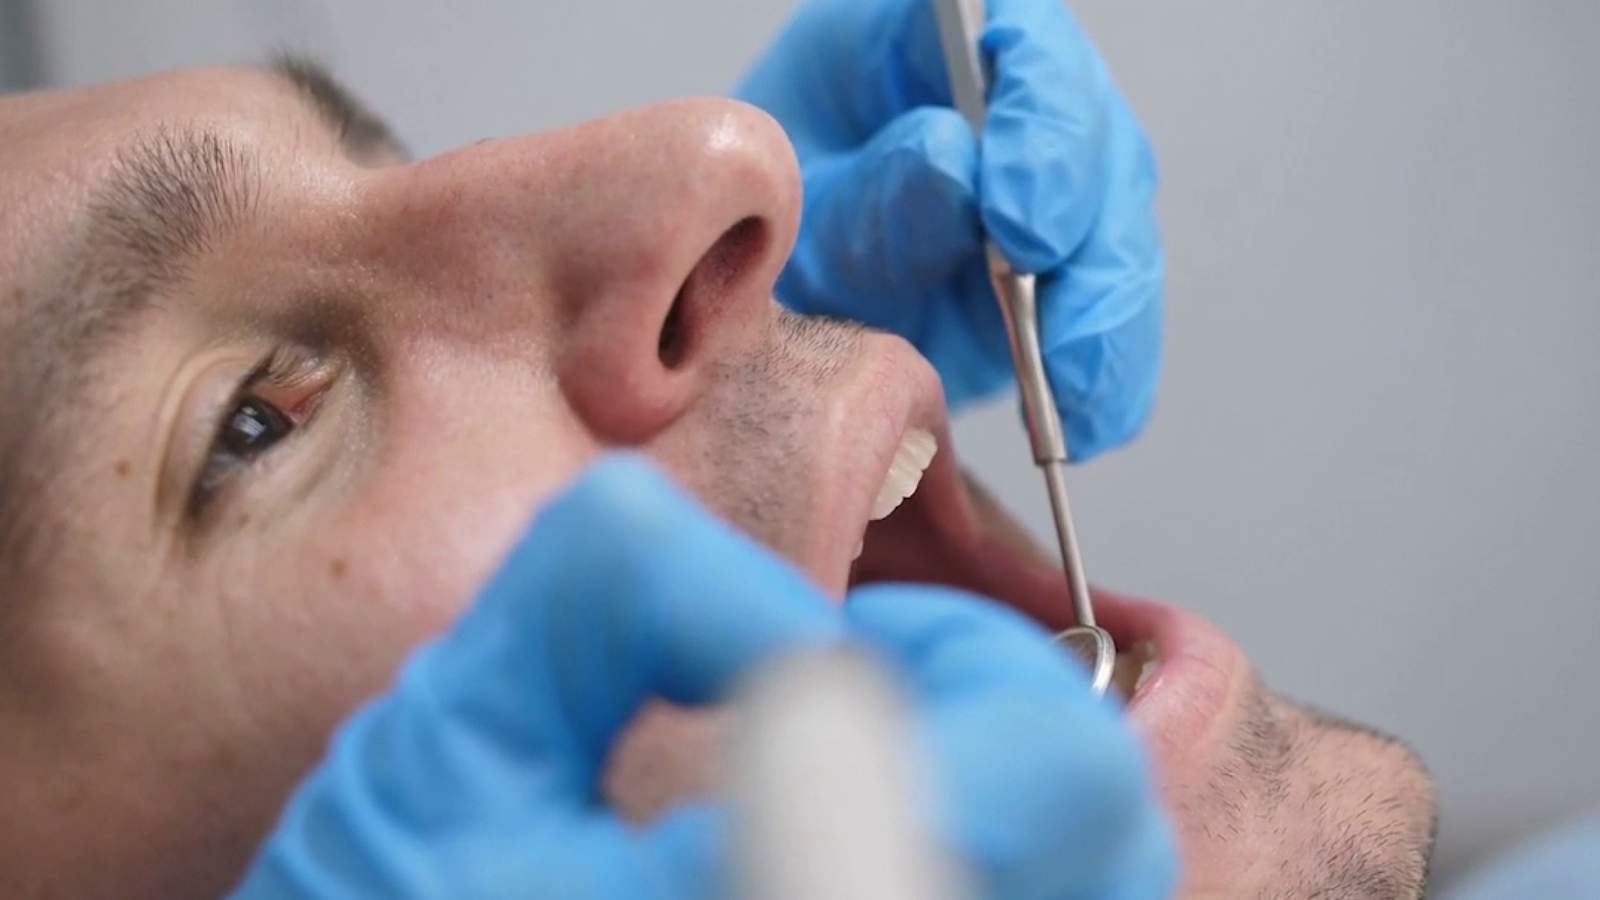 Despite pandemic, dental experts encourage patients to keep up with annual cleanings